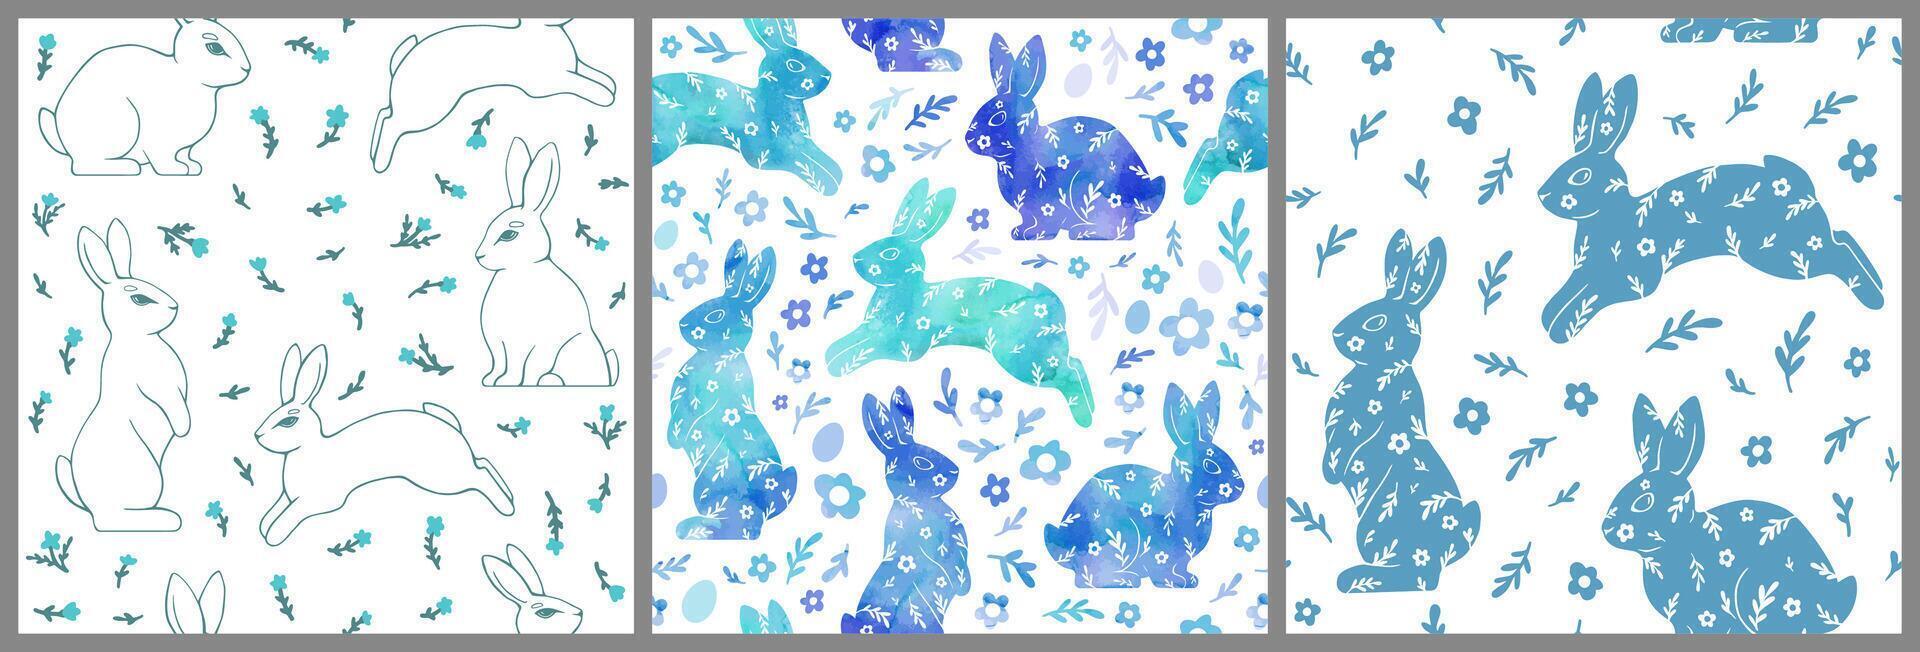 Happy Easter Set of seamless patterns with bunnies, flowers, and eggs. Delicate watercolor illustration. vector